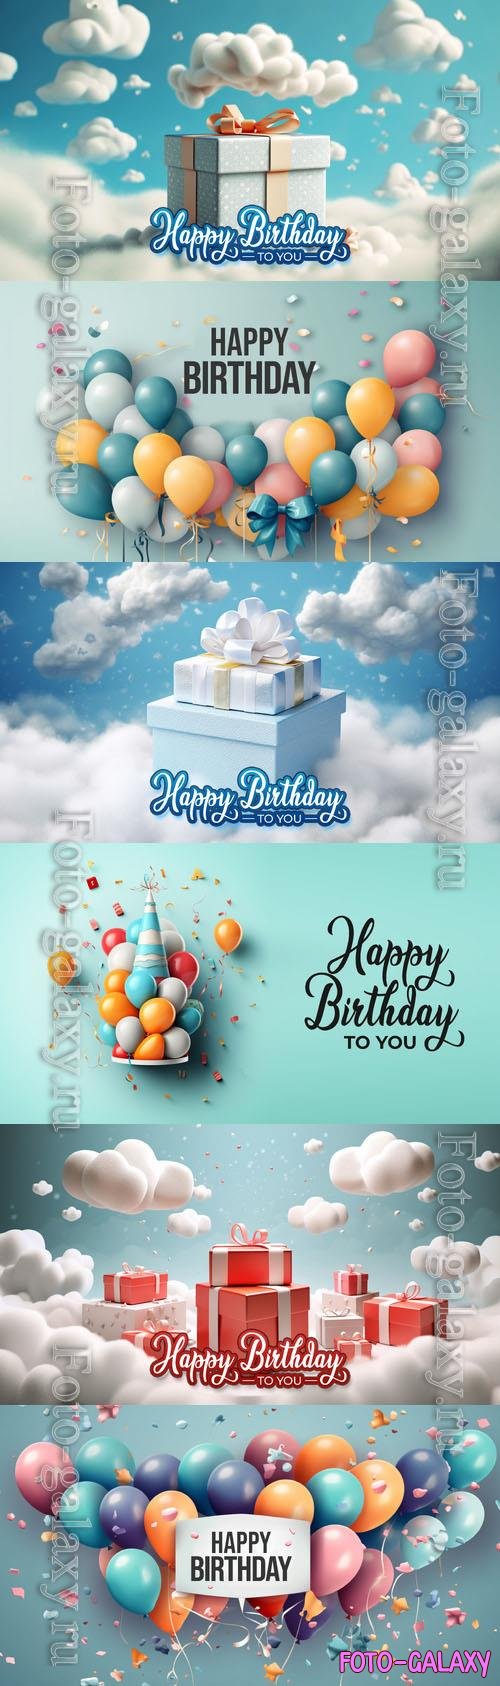 Happy birthday psd backgrounds with gift boxes and balloons